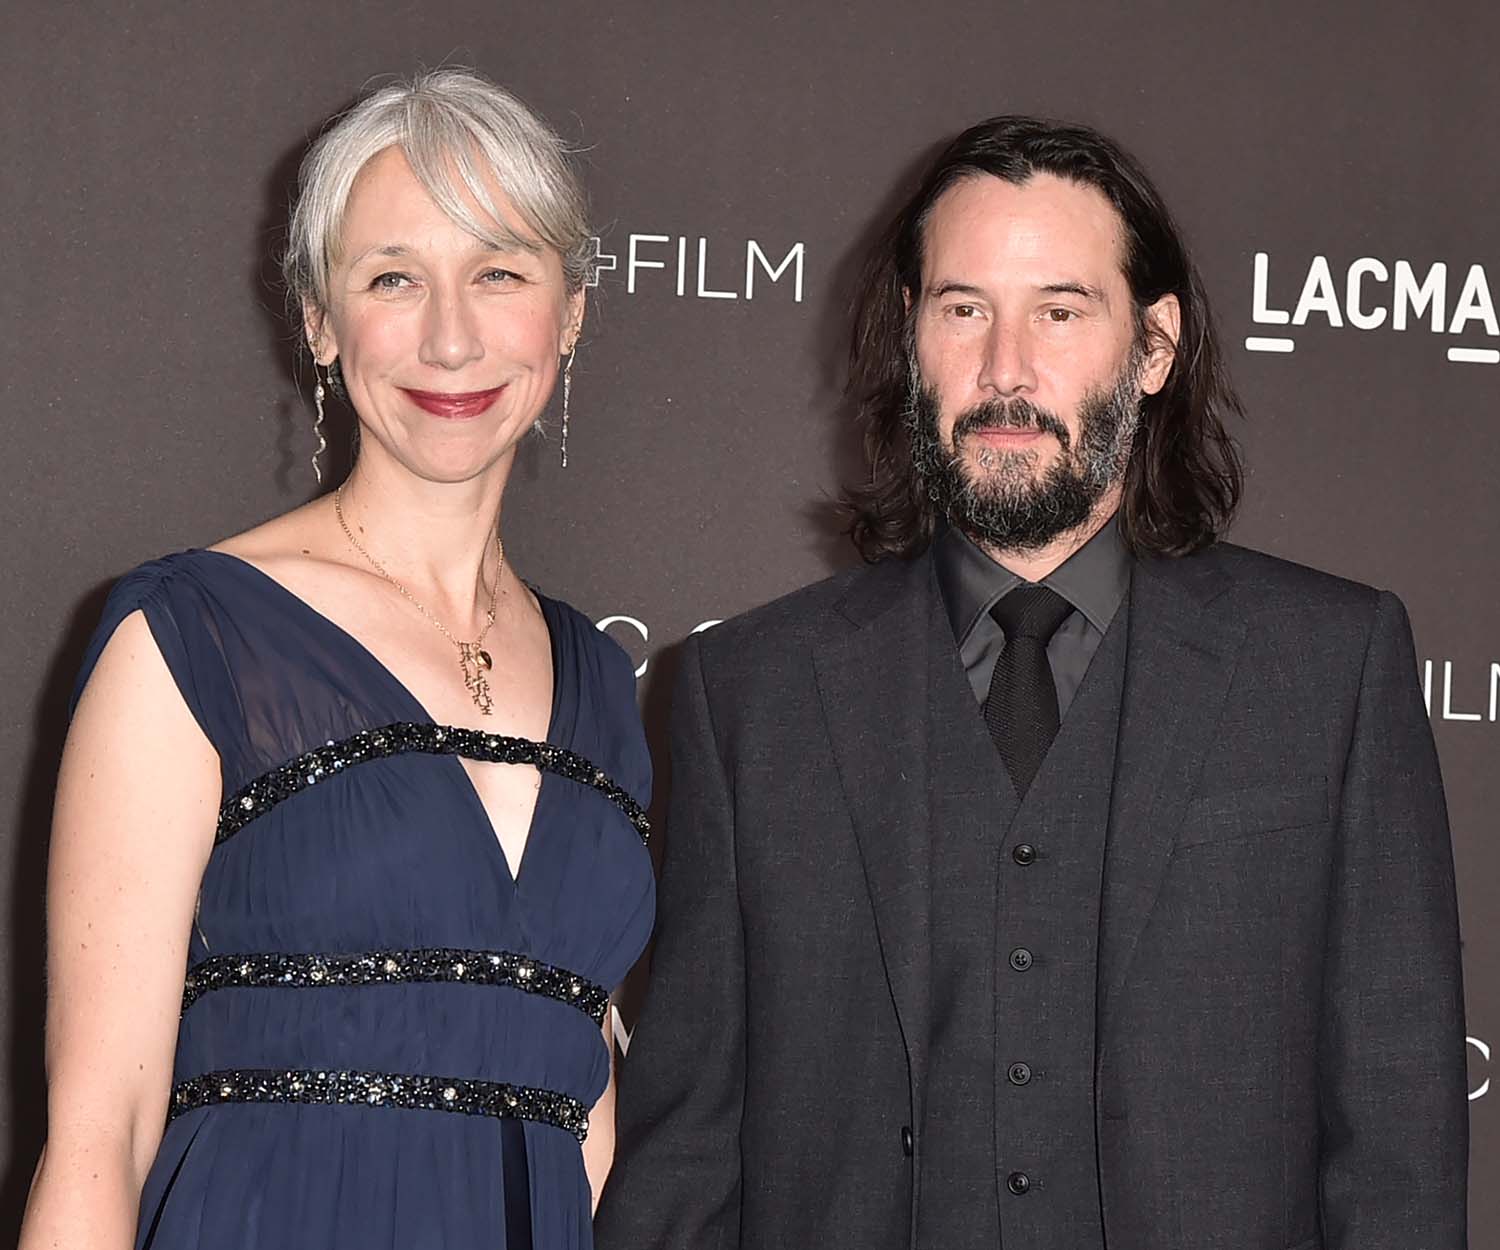 Keanu Reeves steps out with his first serious girlfriend in decades